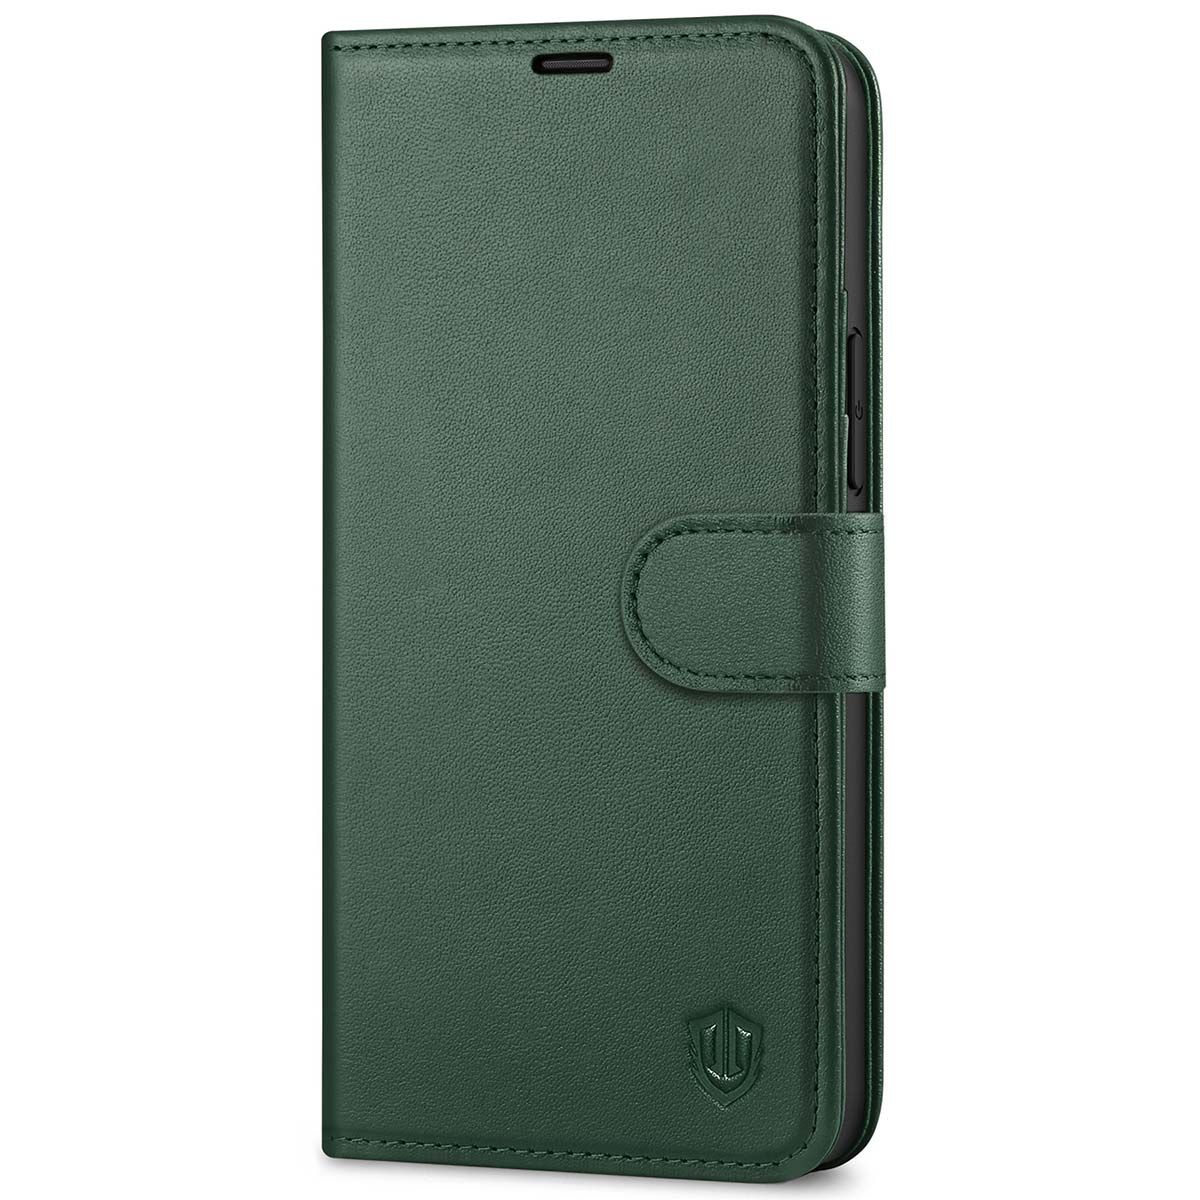 Shieldon Iphone 13 Mini Genuine Leather Case Midnight Green Iphone 13 Mini Wallet Cover With Magnetic Clasp Closure Rfid Blocking Book Flip Folio Kickstand Phone Case For Iphone 13 Mini 5 4 Inch